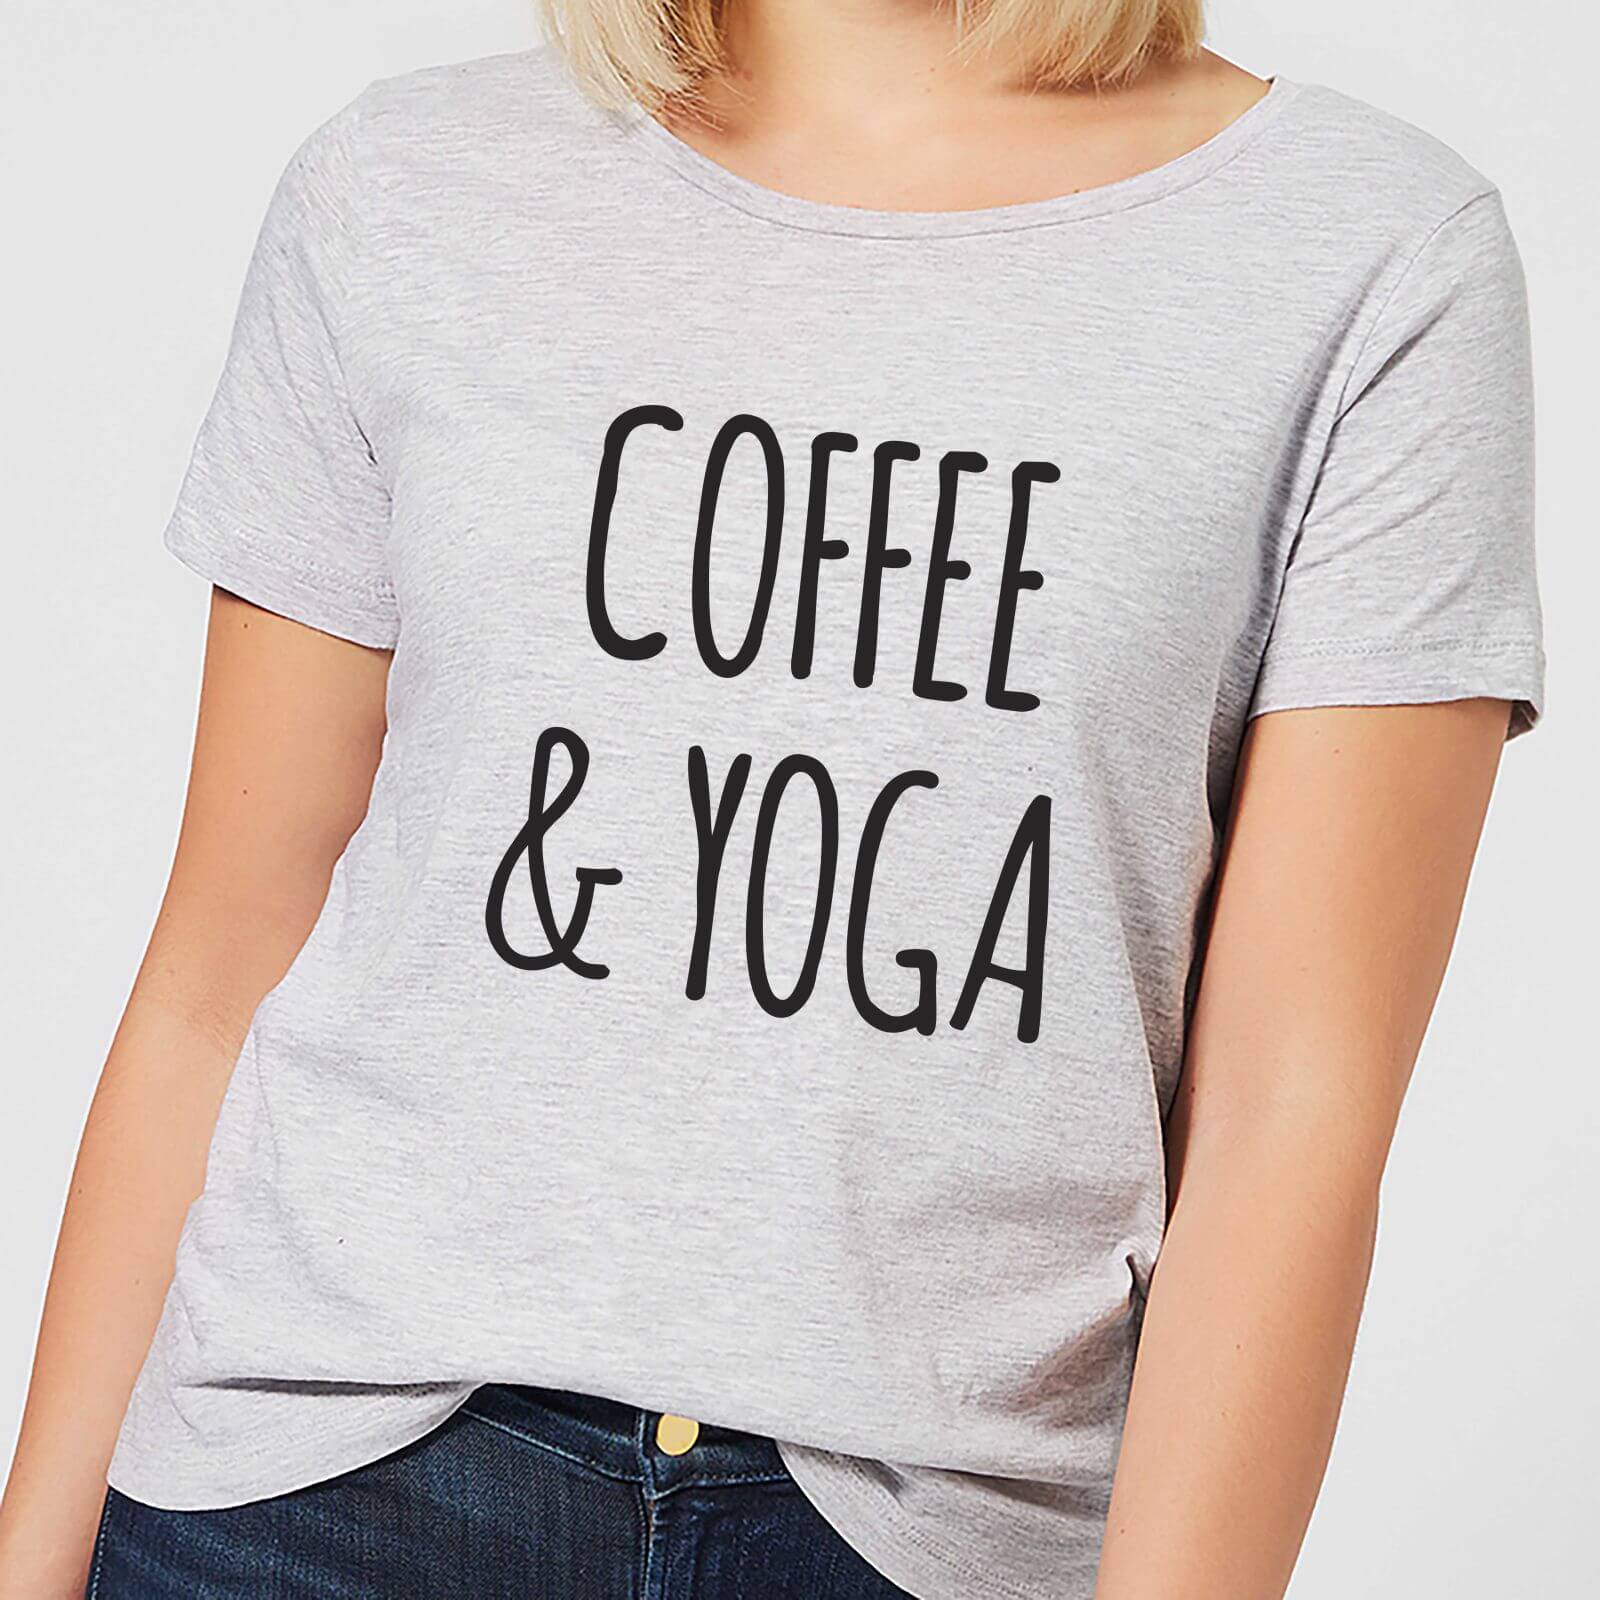 Fitness and Loungewear Coffee and Yoga Women's T-Shirt - Grey - 5XL - Grey